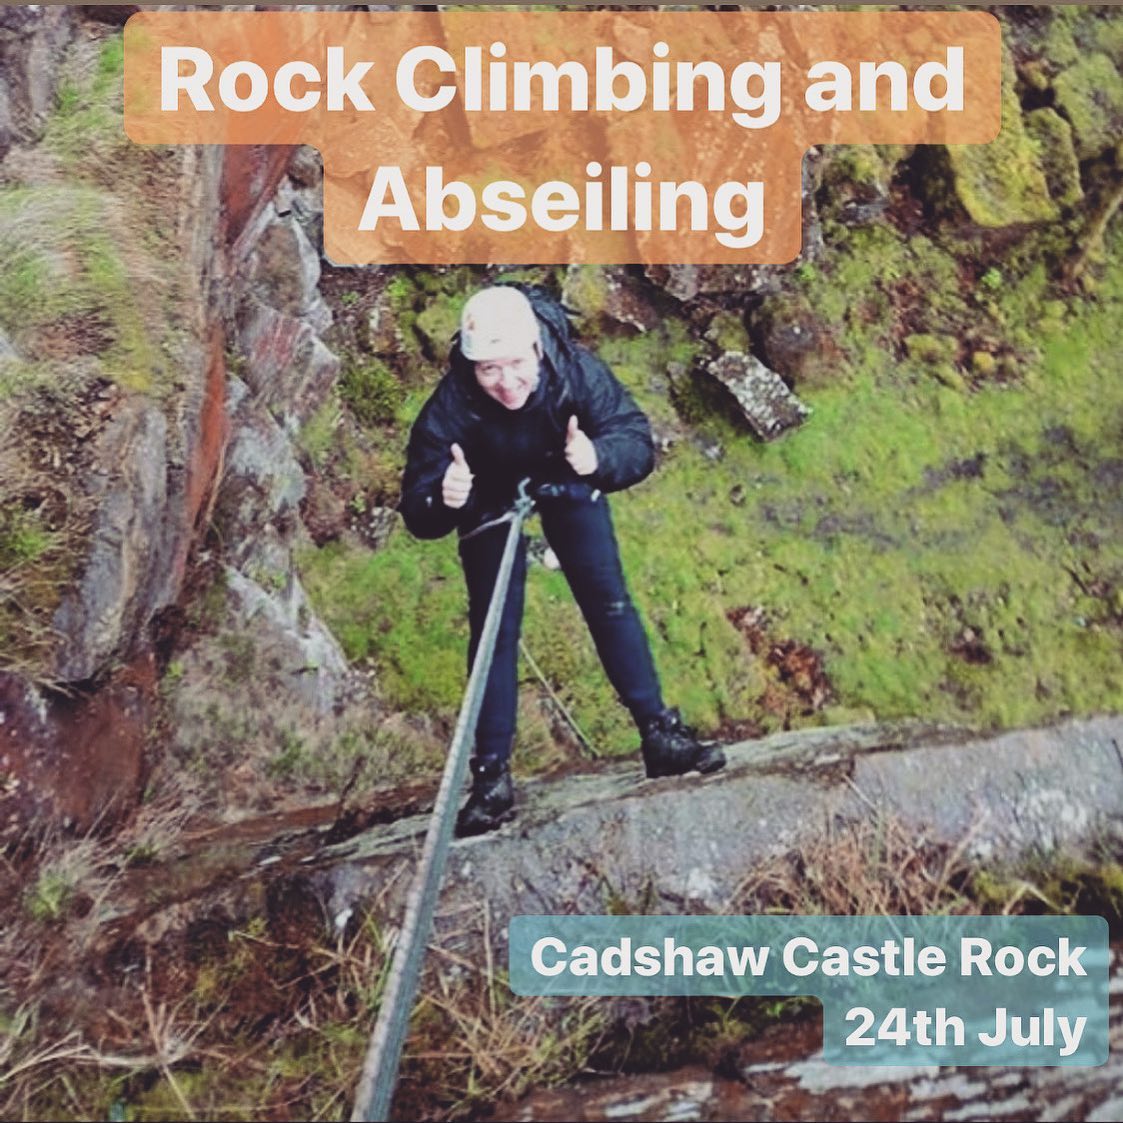 Spaces rock climbing and abseiling in North Manchester on 24th July! More info and booking at www.wilderness-development.com, link in our bio 🧗‍♀️⛰🧗‍♀️
.
.
.
#wildernessdevelopment #smallbusiness #rockclimbing #climbing #scrambling #abseiling #trysomethingnew #cadshawcastlerocks #cadshawcastlerock #mountainsfellsandhikes #roamtheuk #outdoorpursuits #outdooradventures #outdooractivities #nationalparksuk #booknow